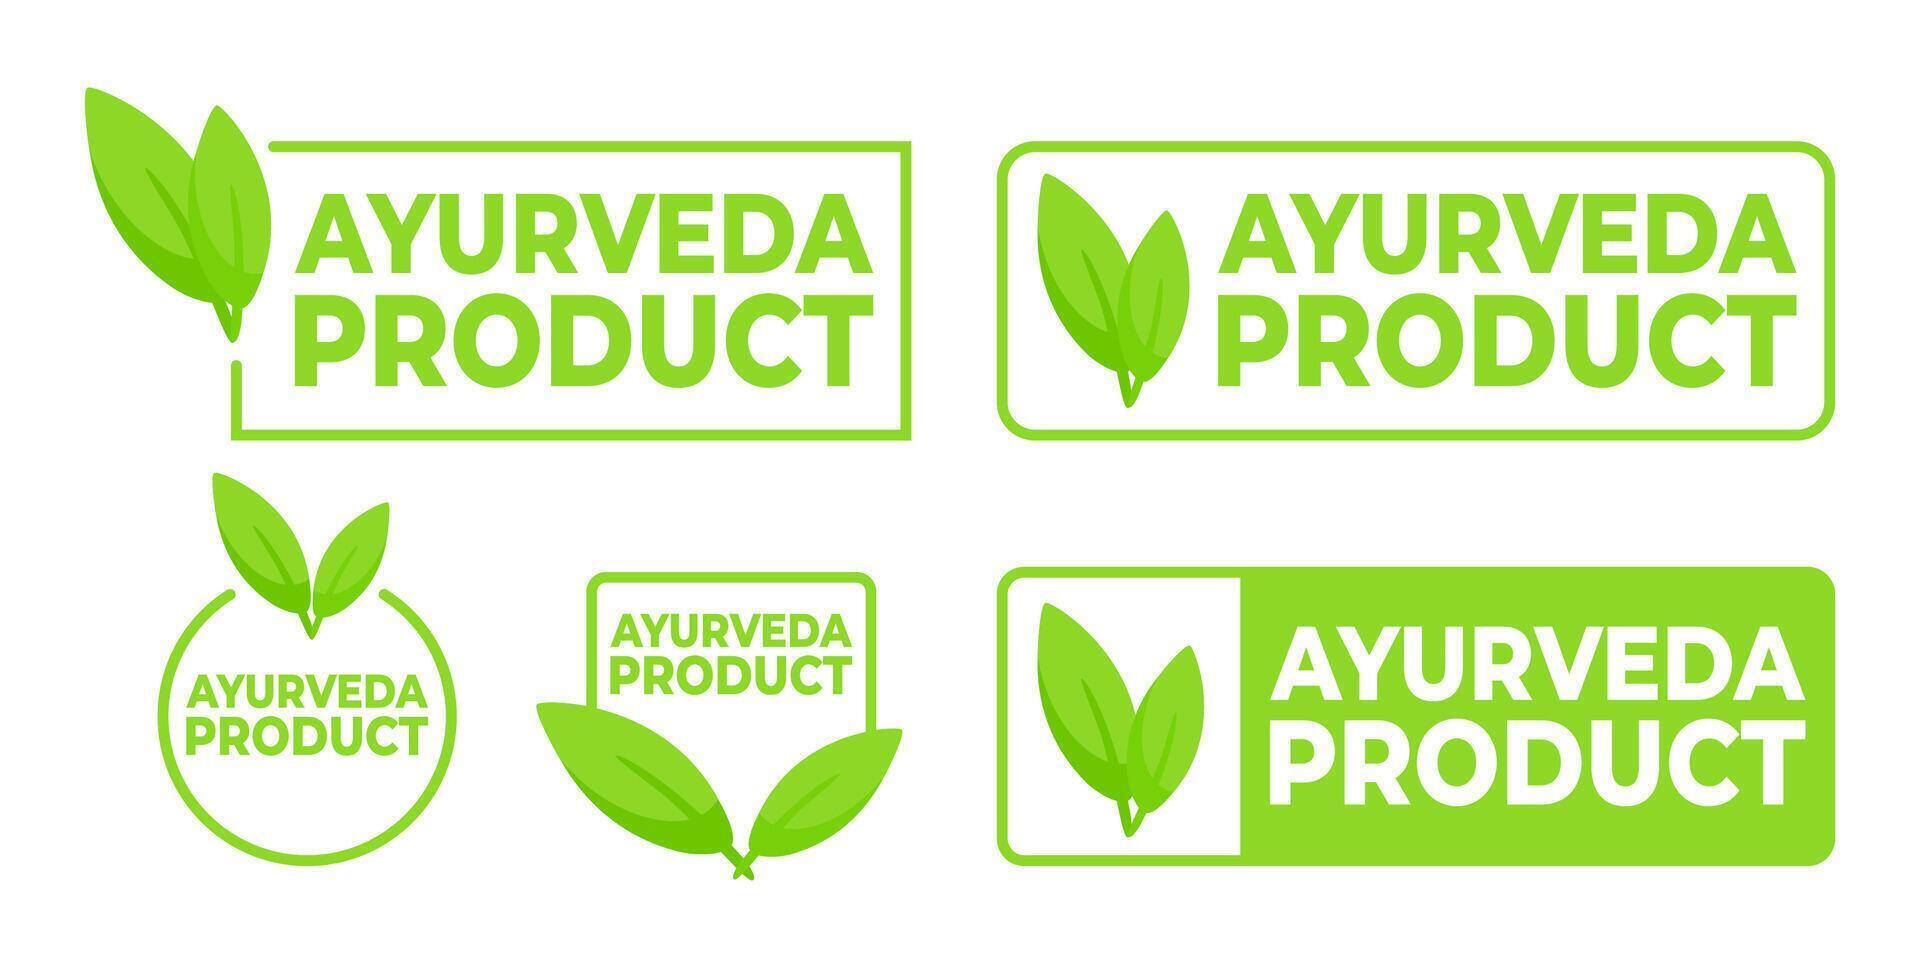 Set of labels featuring the text Ayurveda Product with a herbal leaf symbol, ideal for wellness and holistic health products. vector